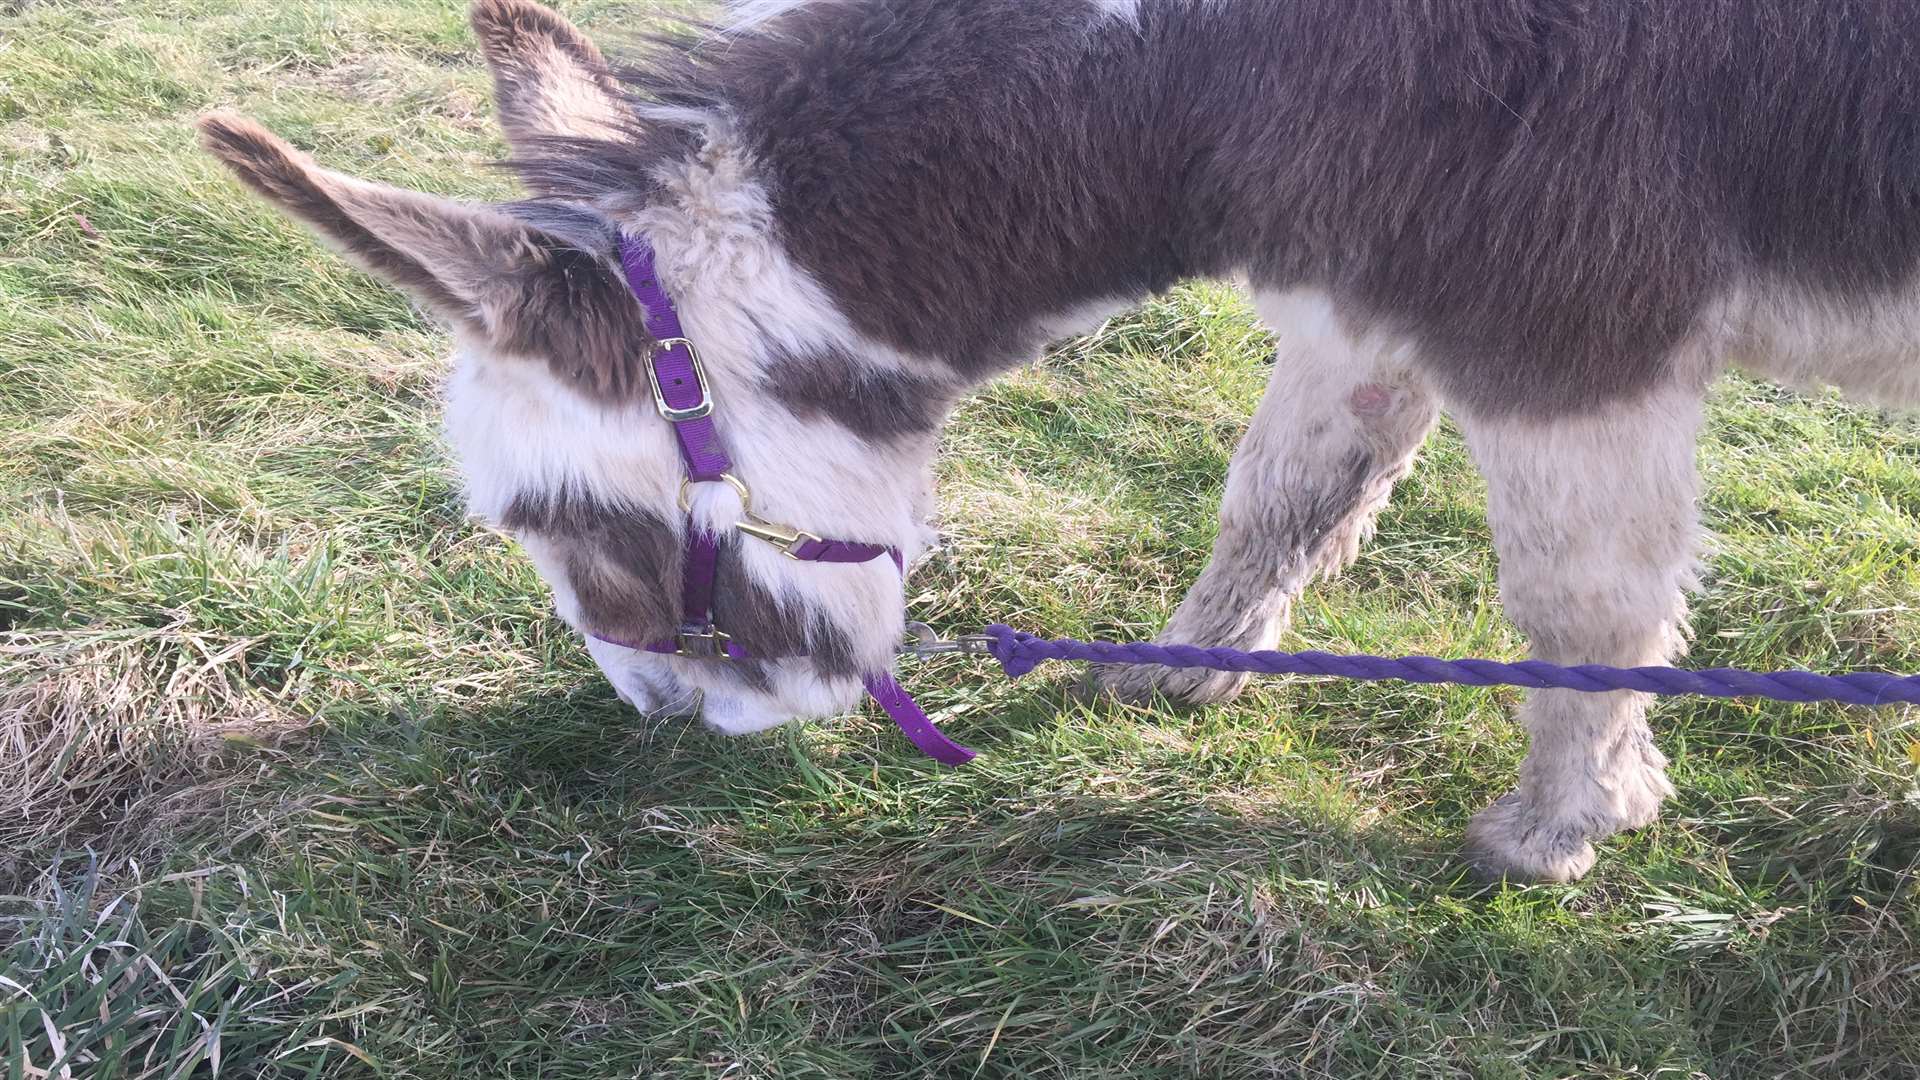 Friday, a previously neglected donkey, was rehomed with Charity in April 2015